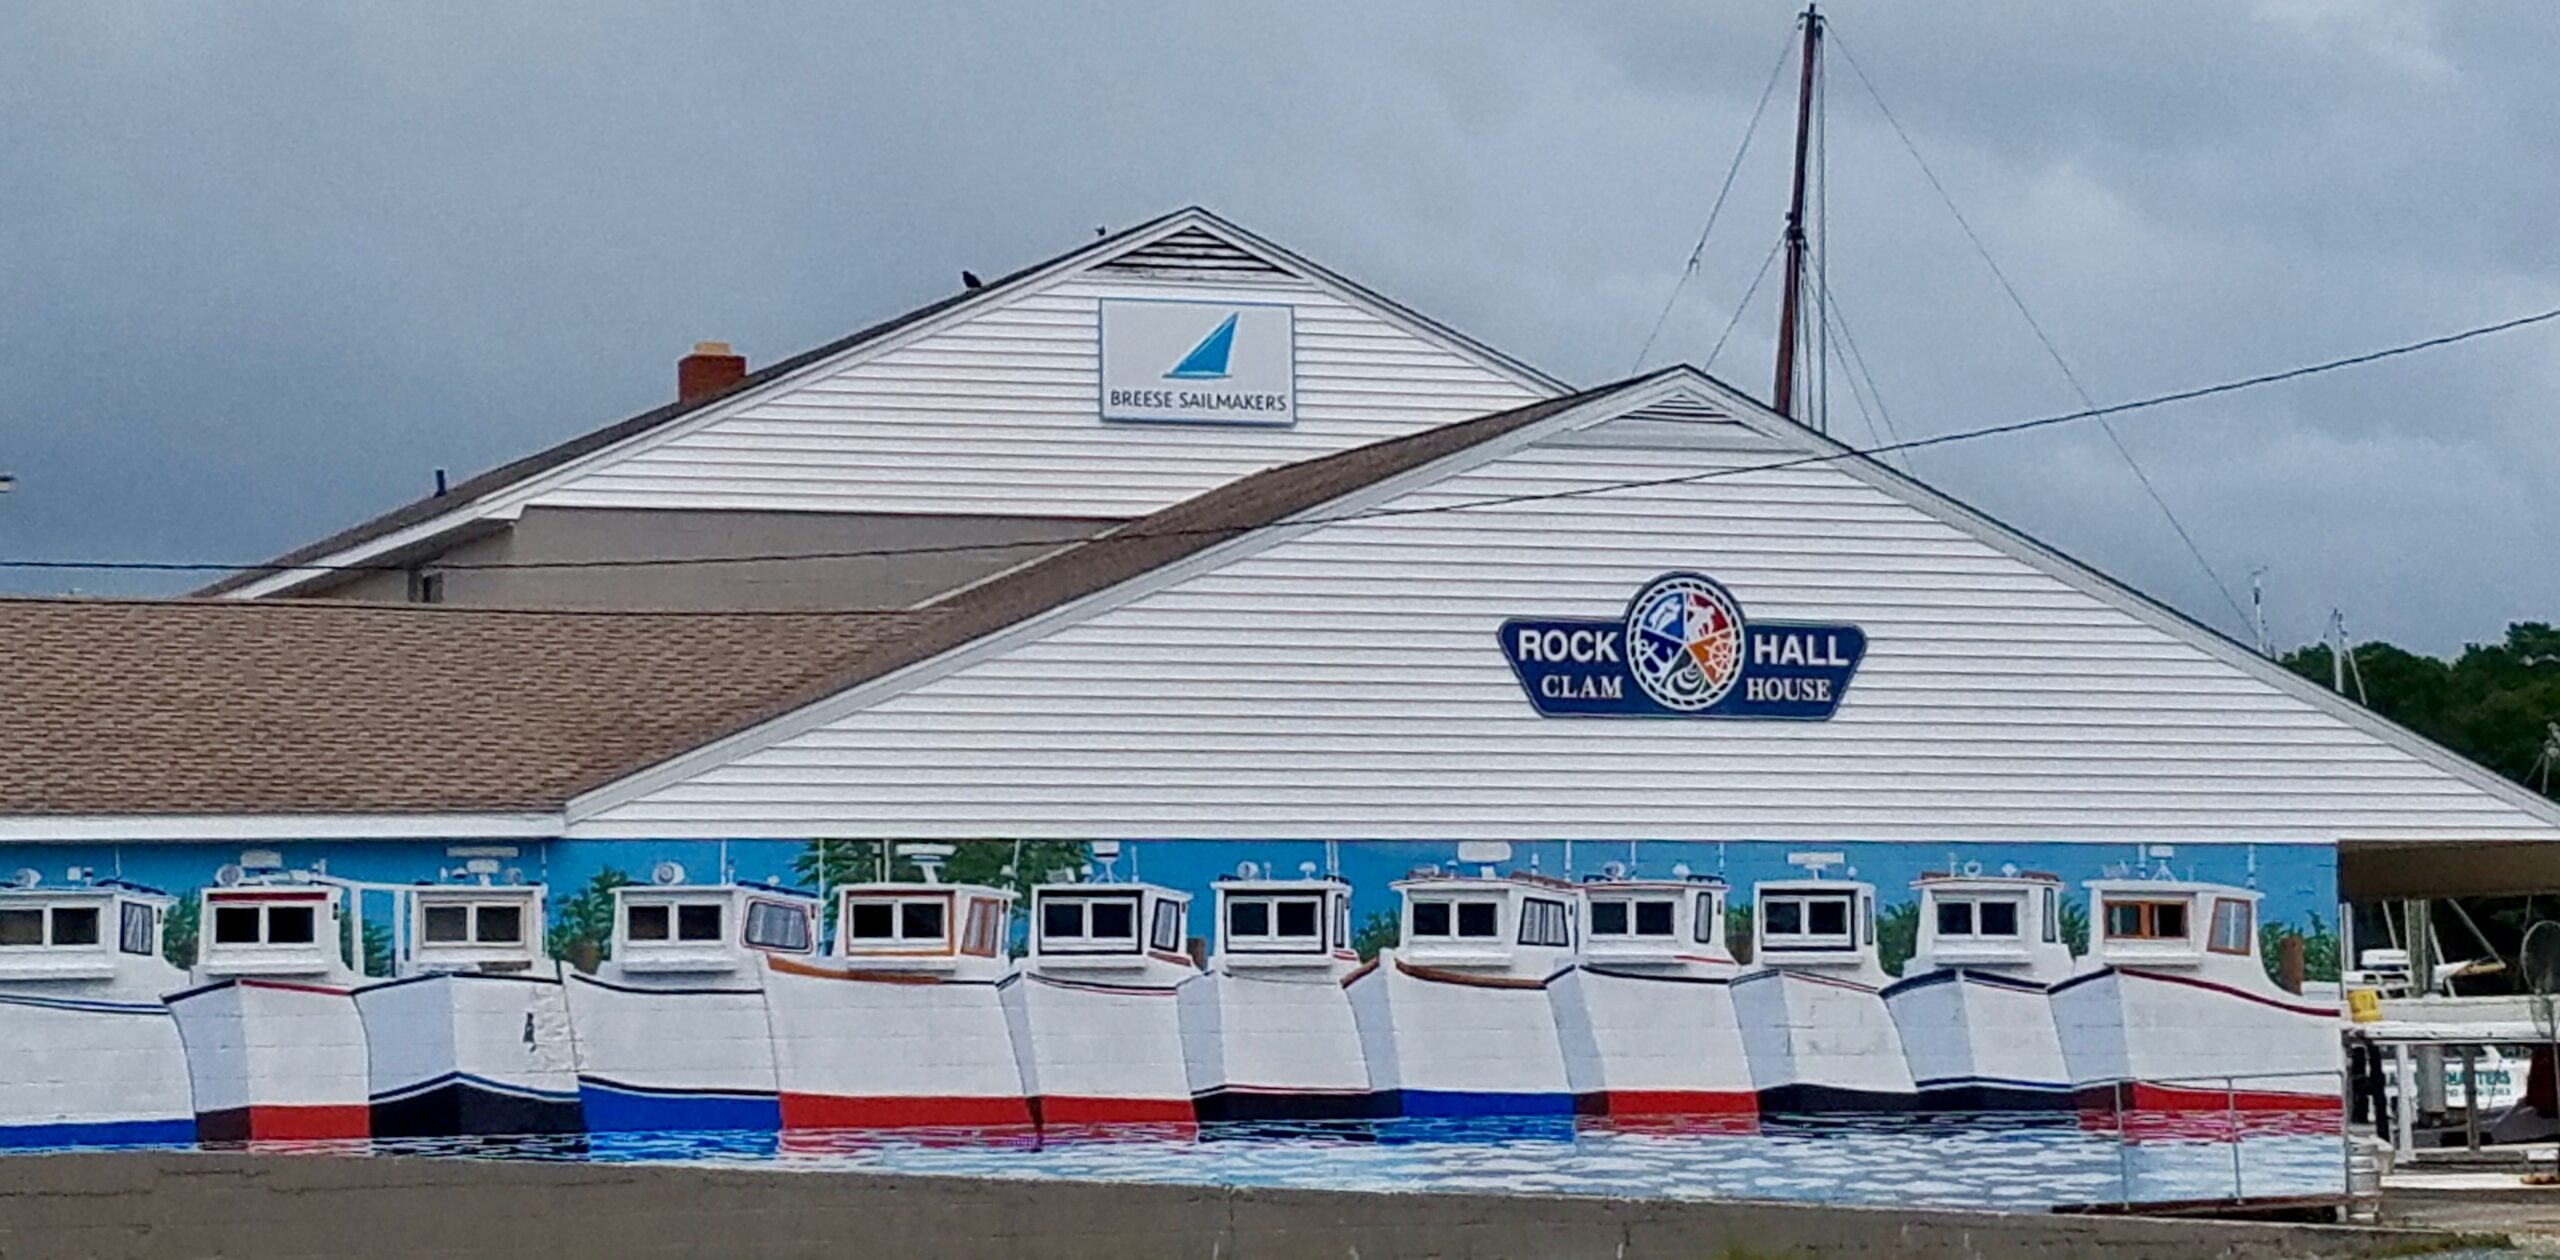 Breese Sailmakers at Rock Hall Clam House